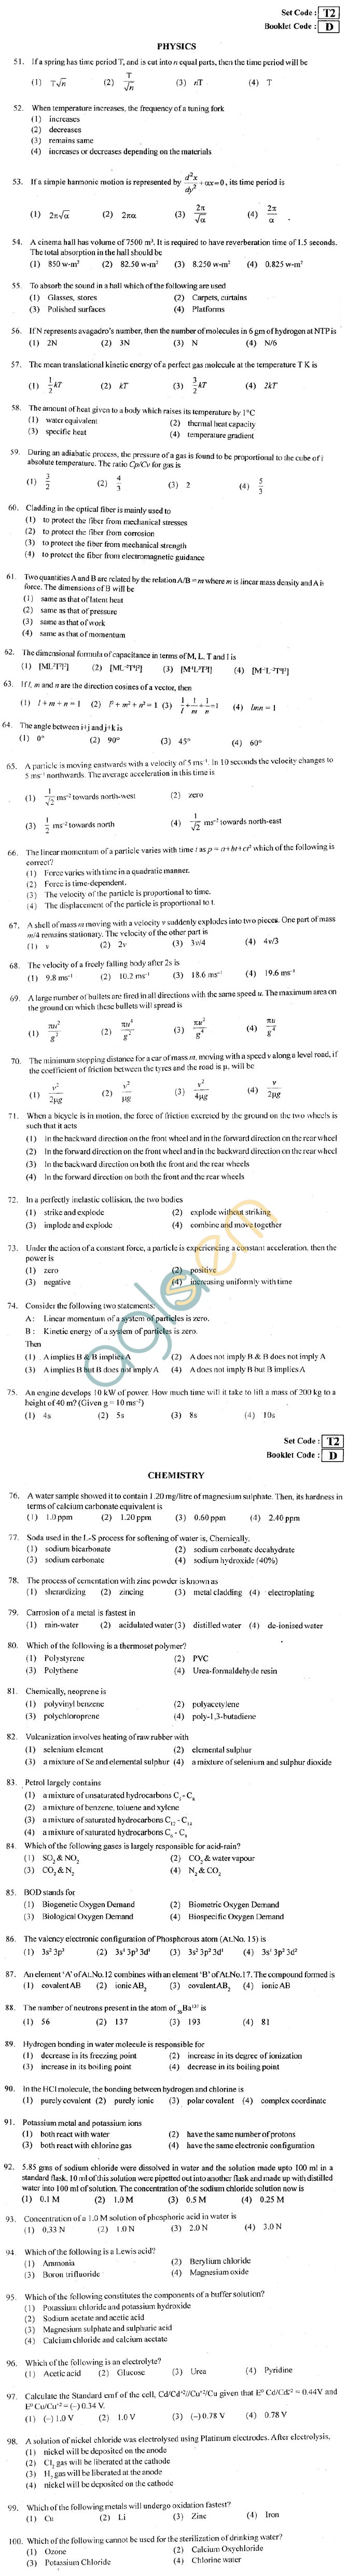 ECET 2012 Question Paper with Answers - Electronics and Instrumentation Engineering